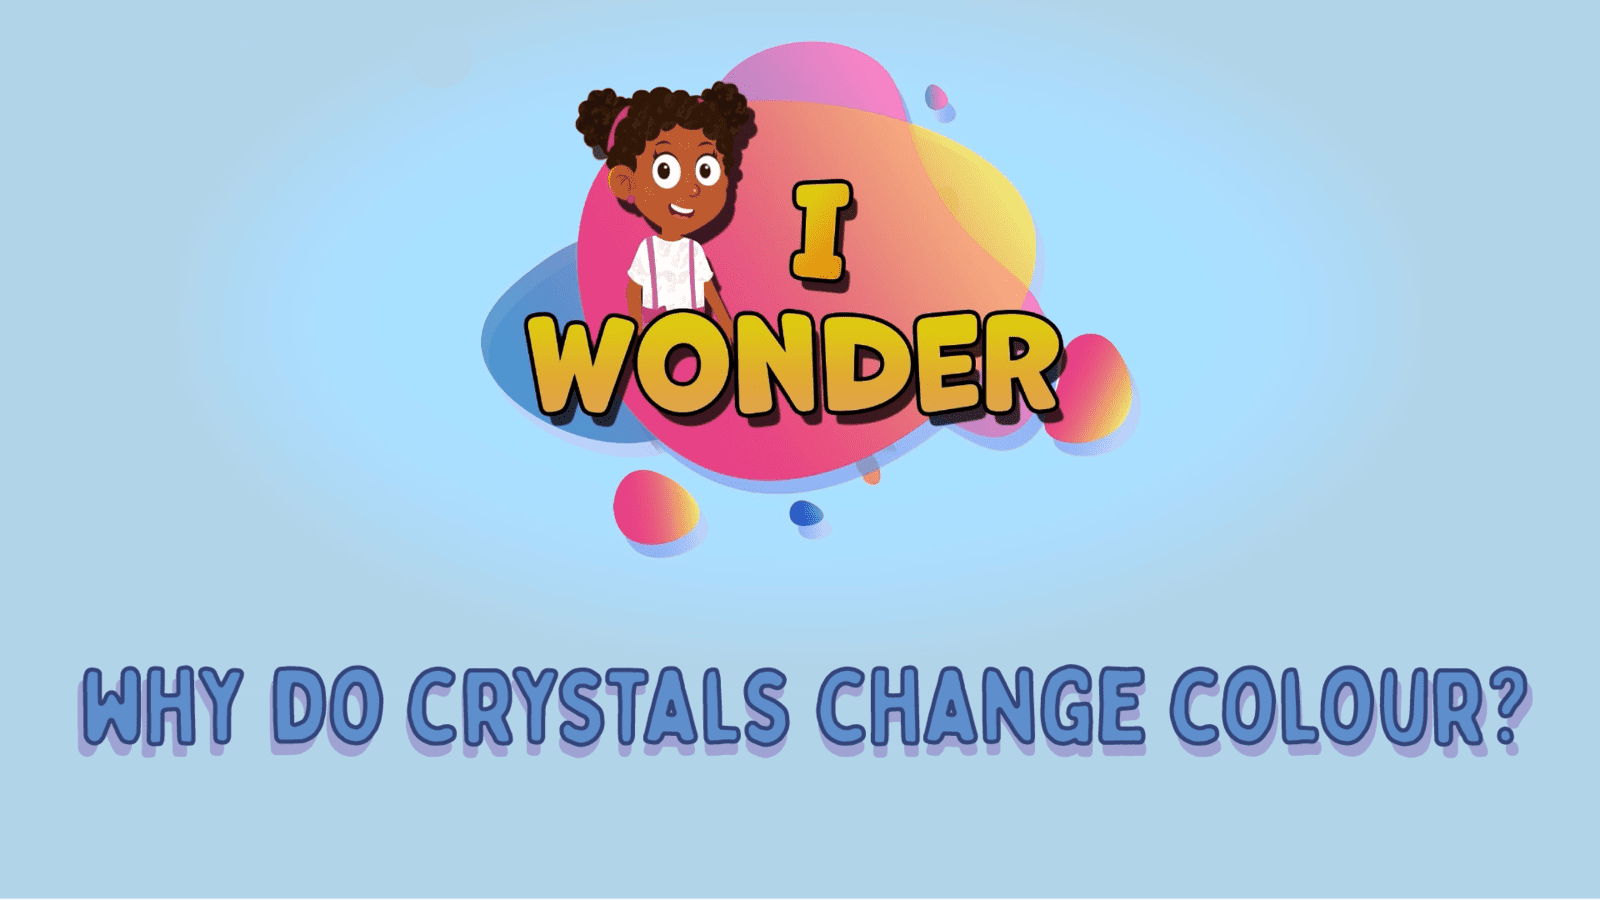 Why Do Crystals Change Colour?